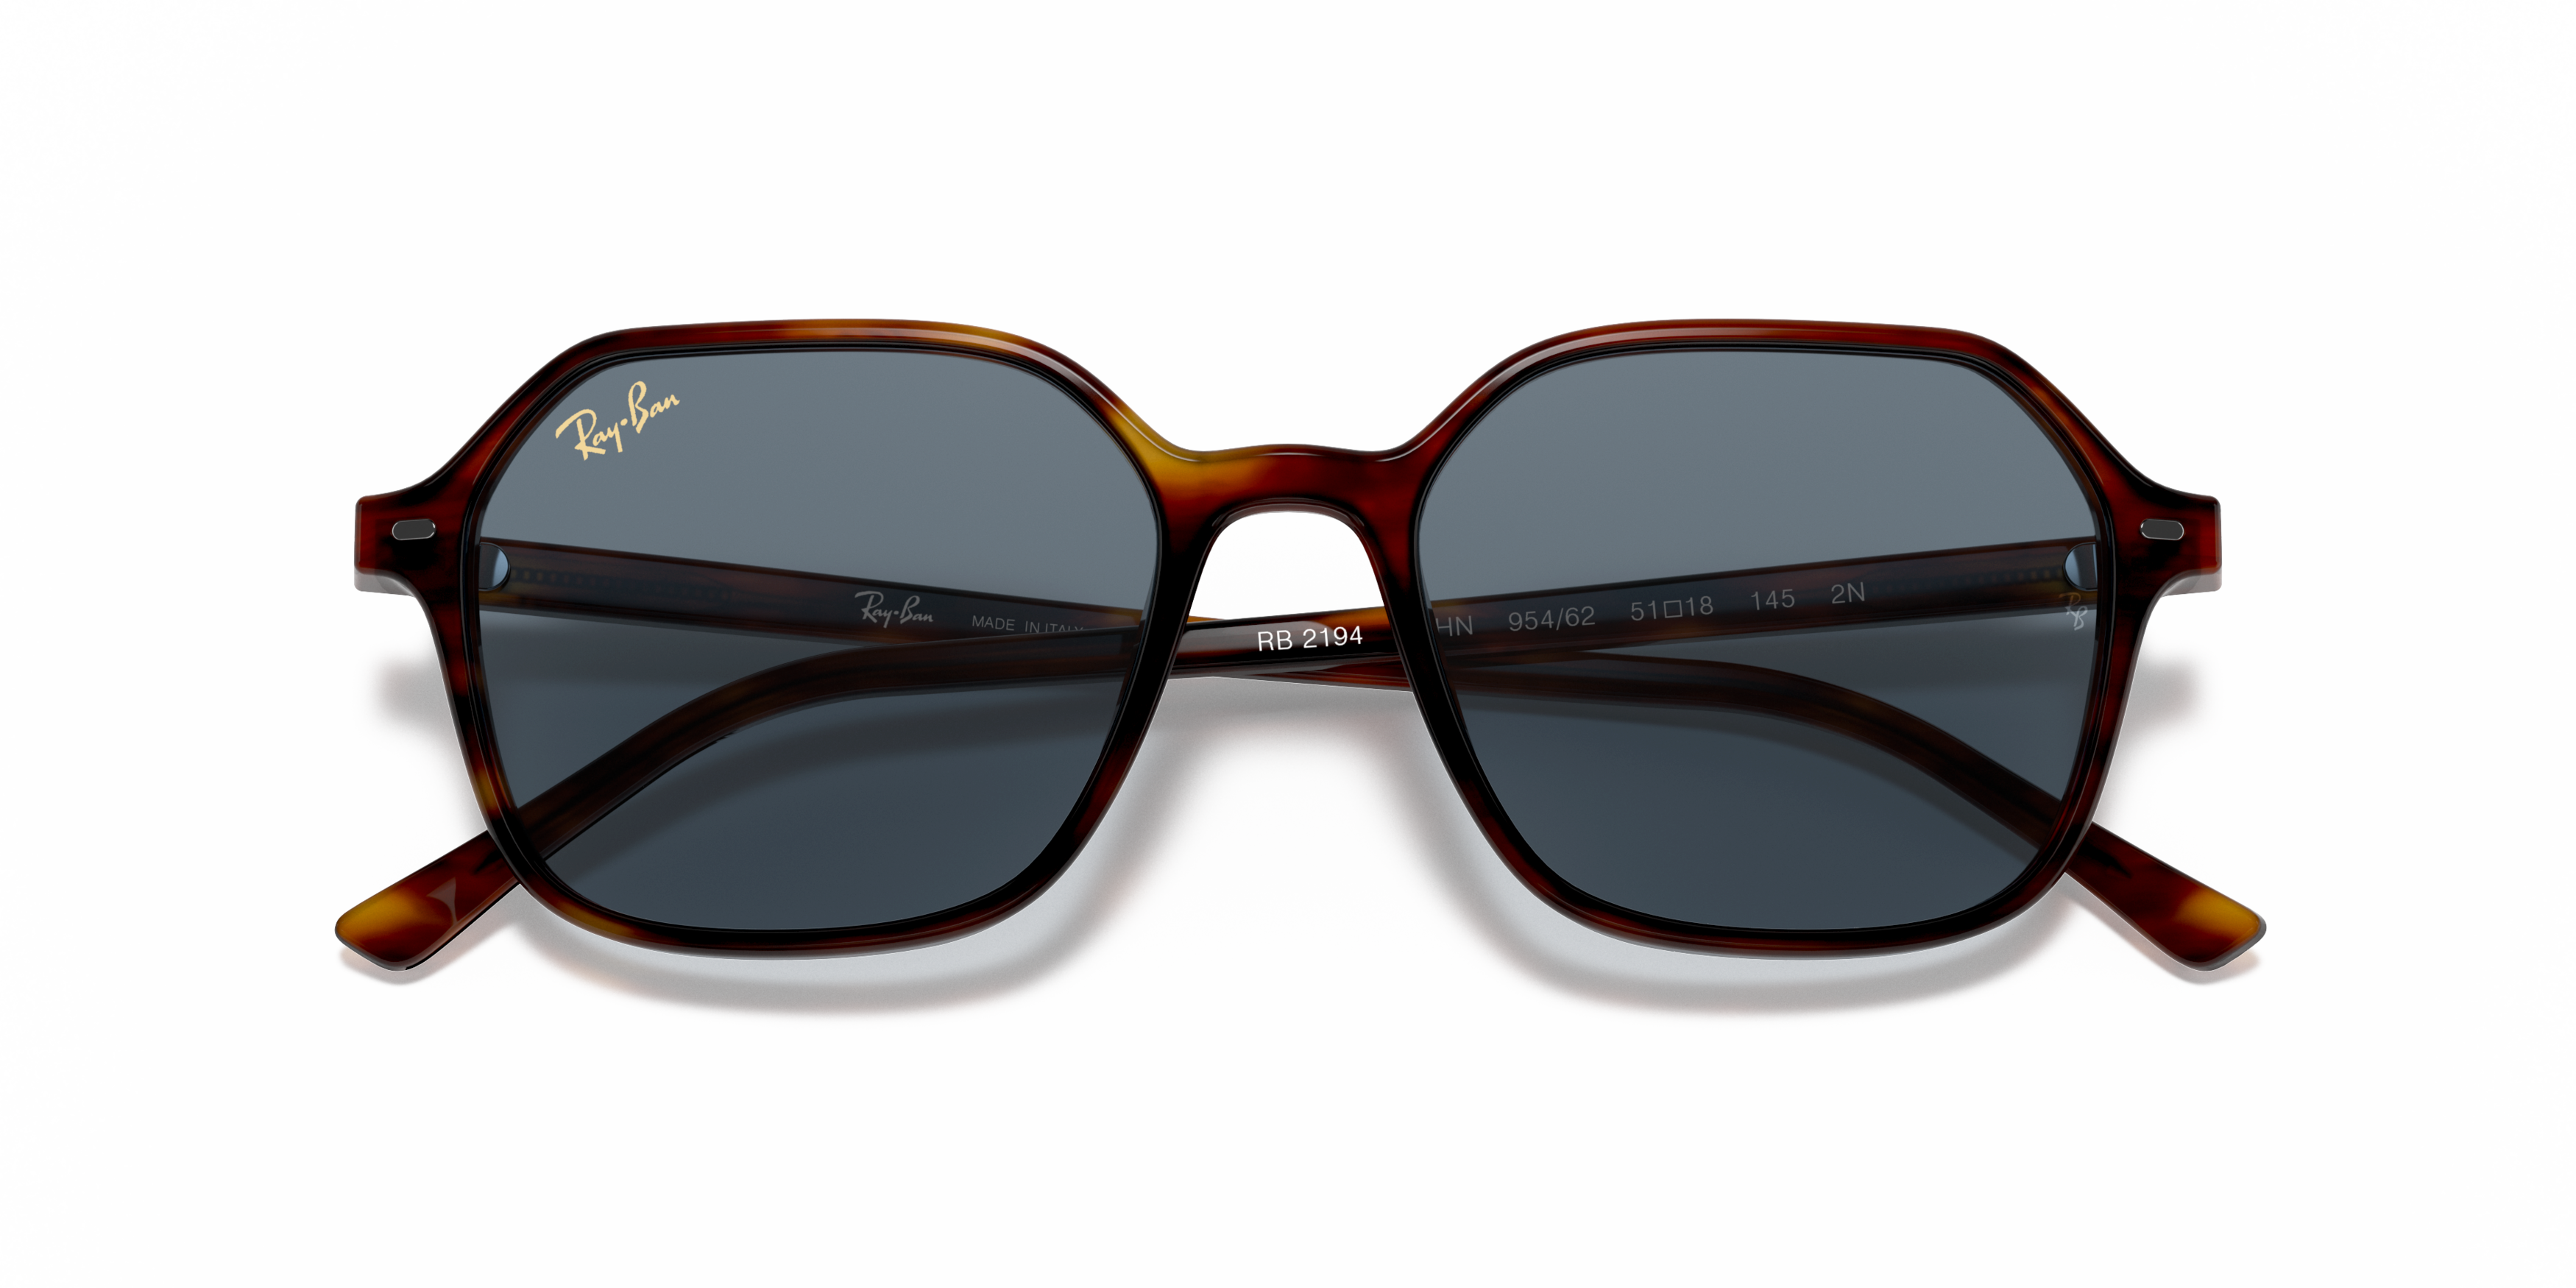 [products.image.folded] RAY-BAN RB2194 954/62